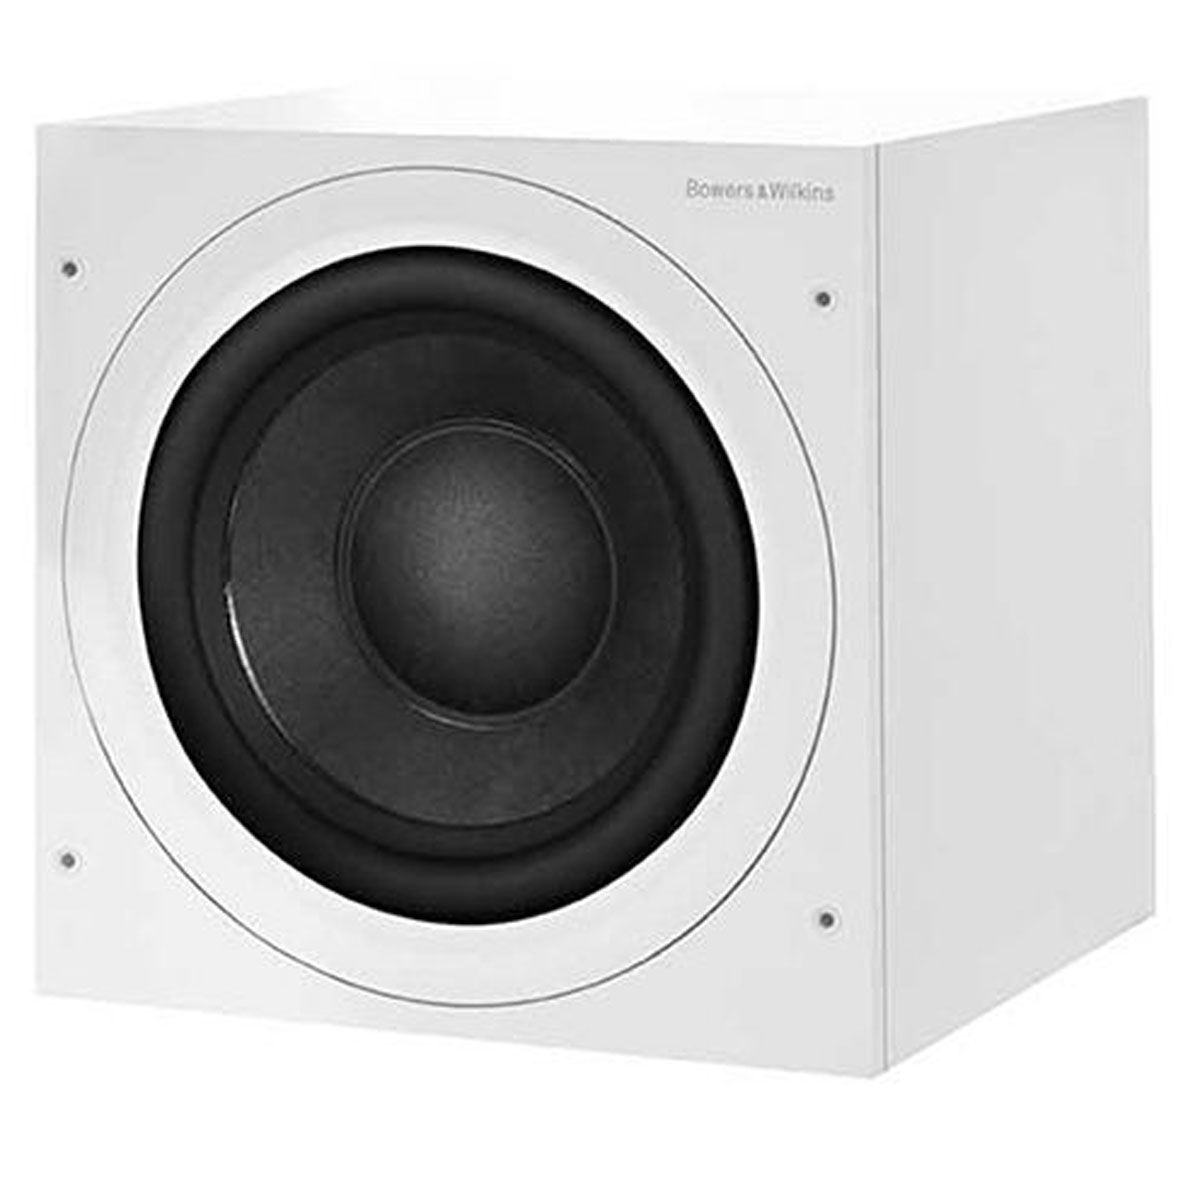 B&W ASW608 Subwoofer without grille - White